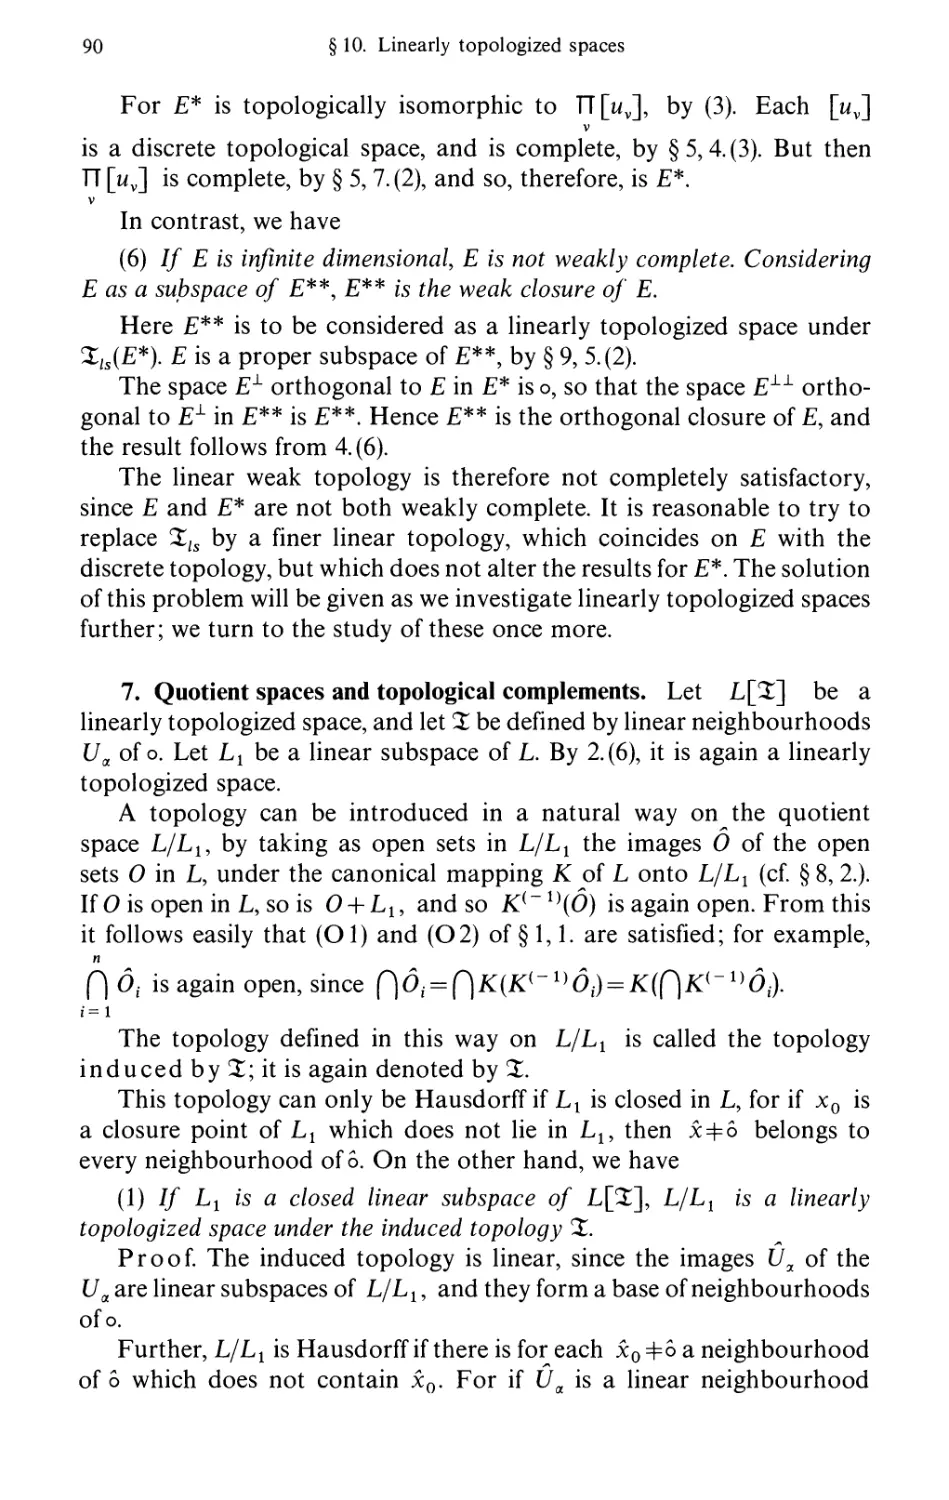 7. Quotient spaces and topological complements